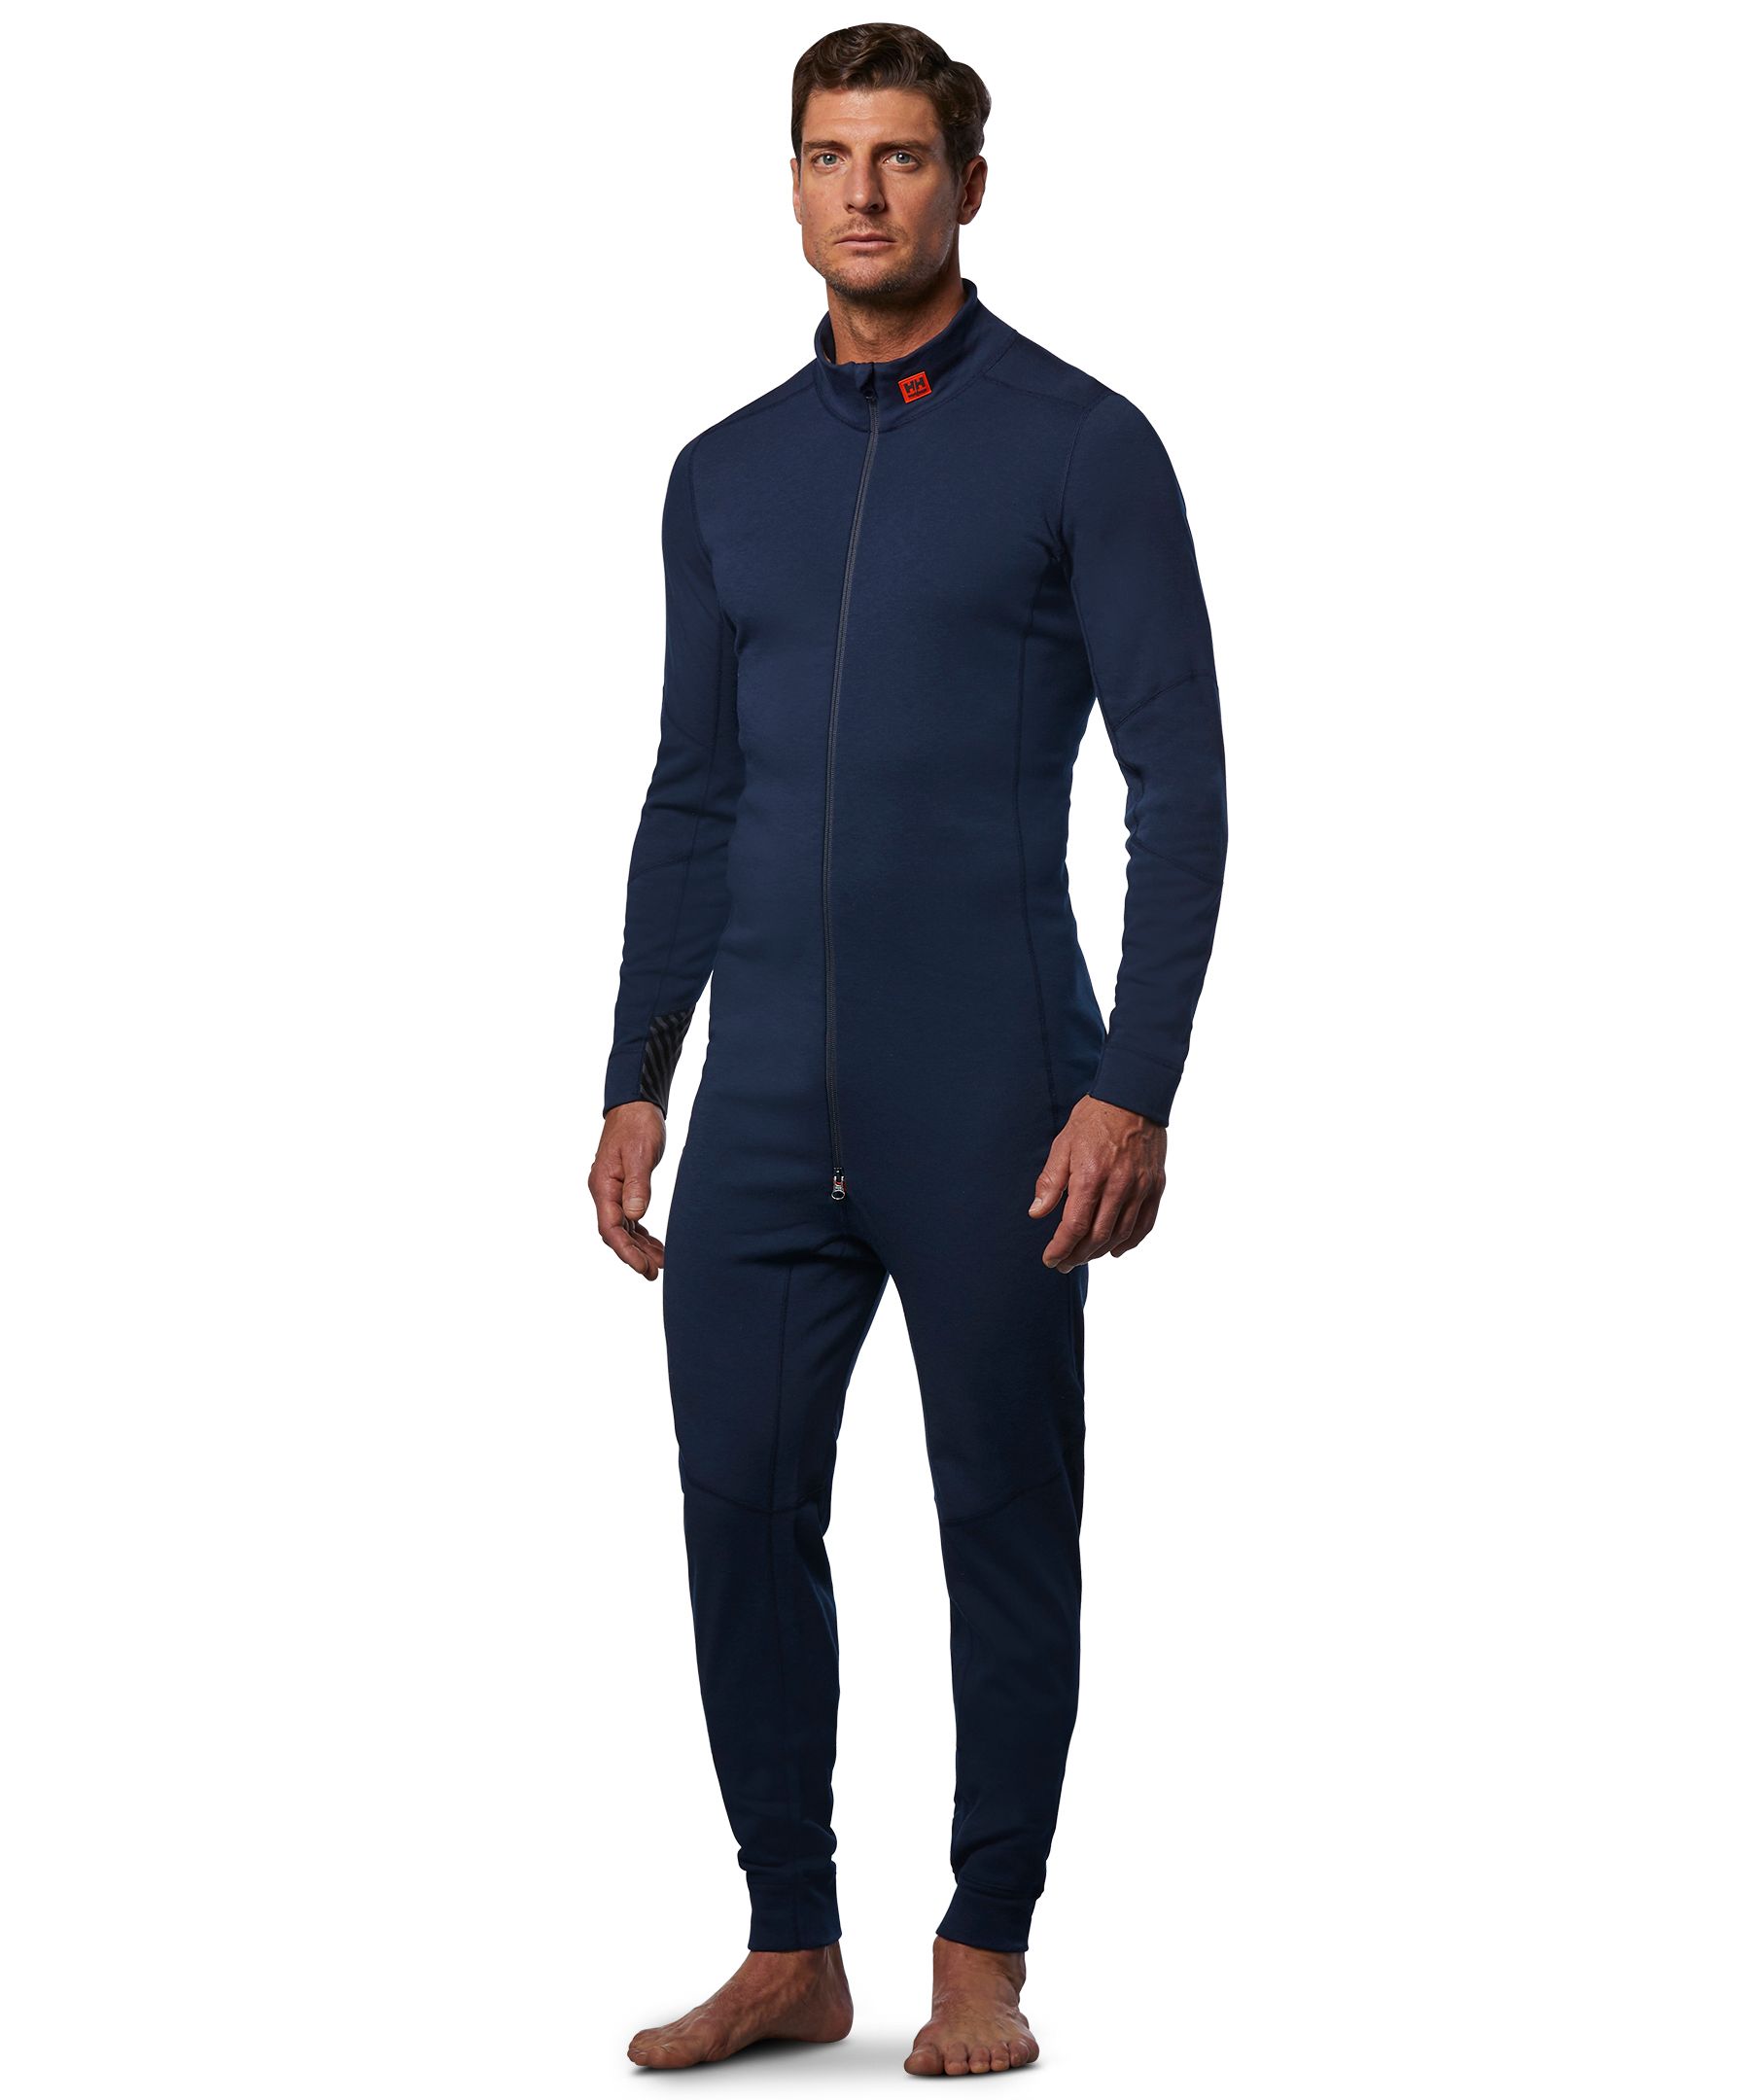 Helly Hansen Men's Lifa Max Combination Base Layer One Piece Thermal Suit  Navy